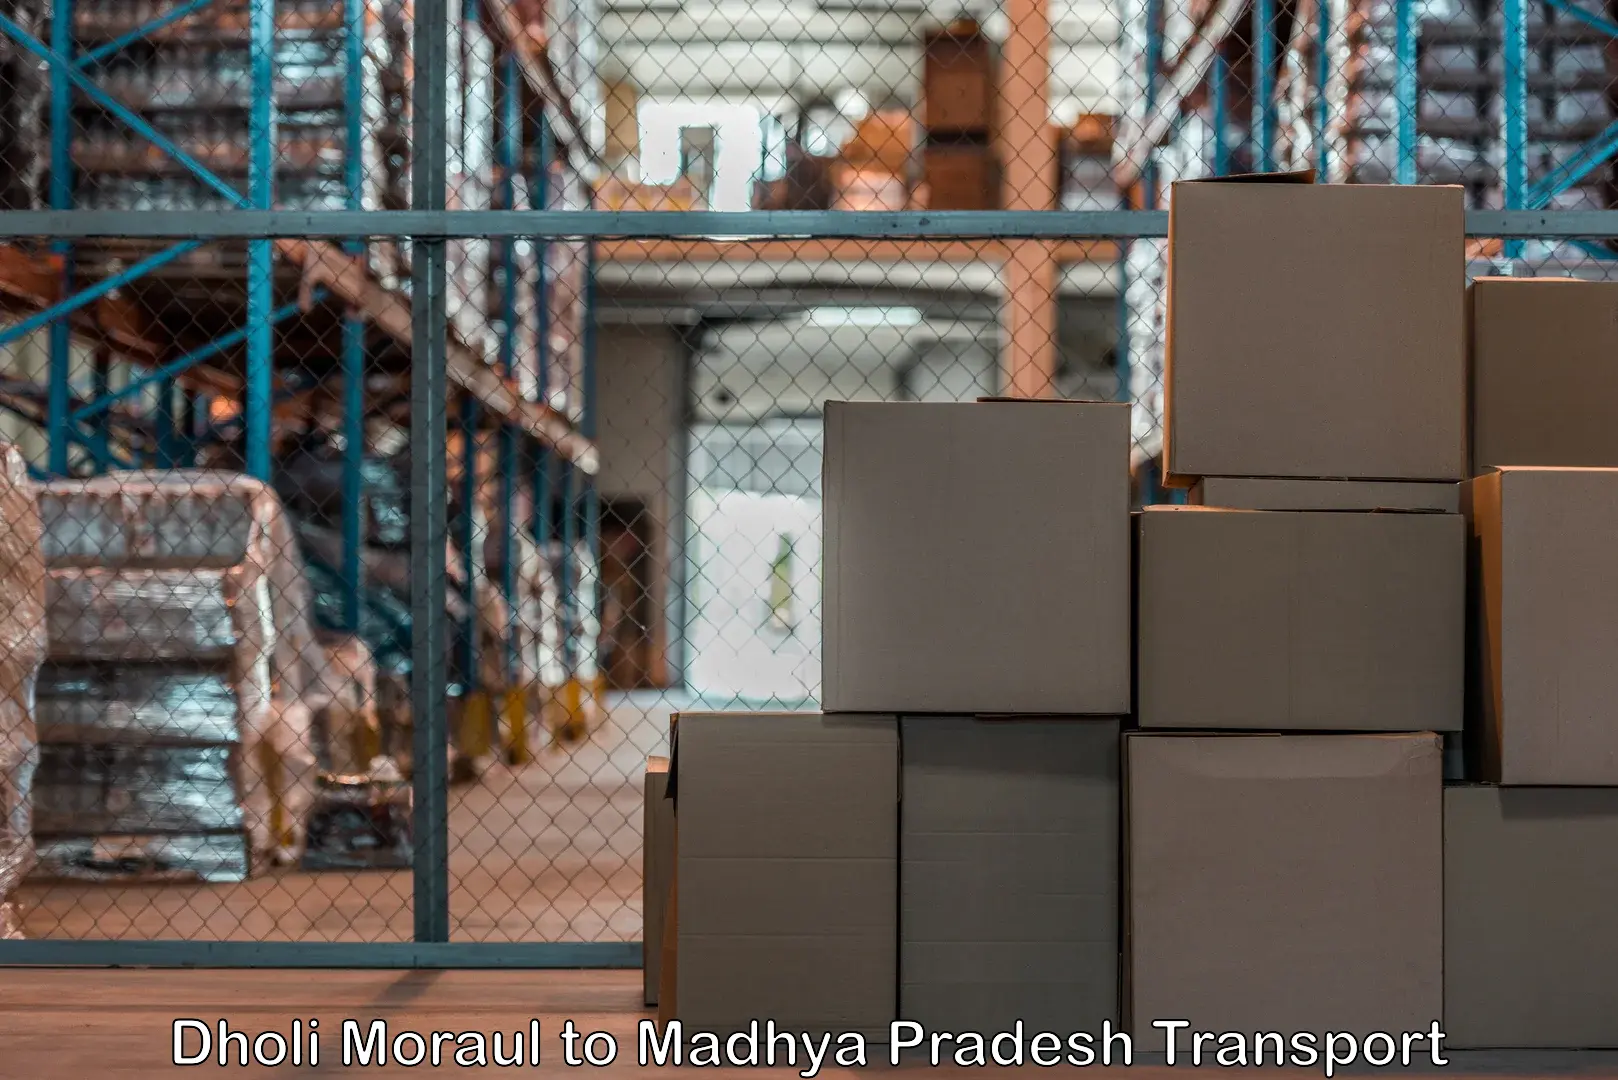 Truck transport companies in India Dholi Moraul to Pithampur